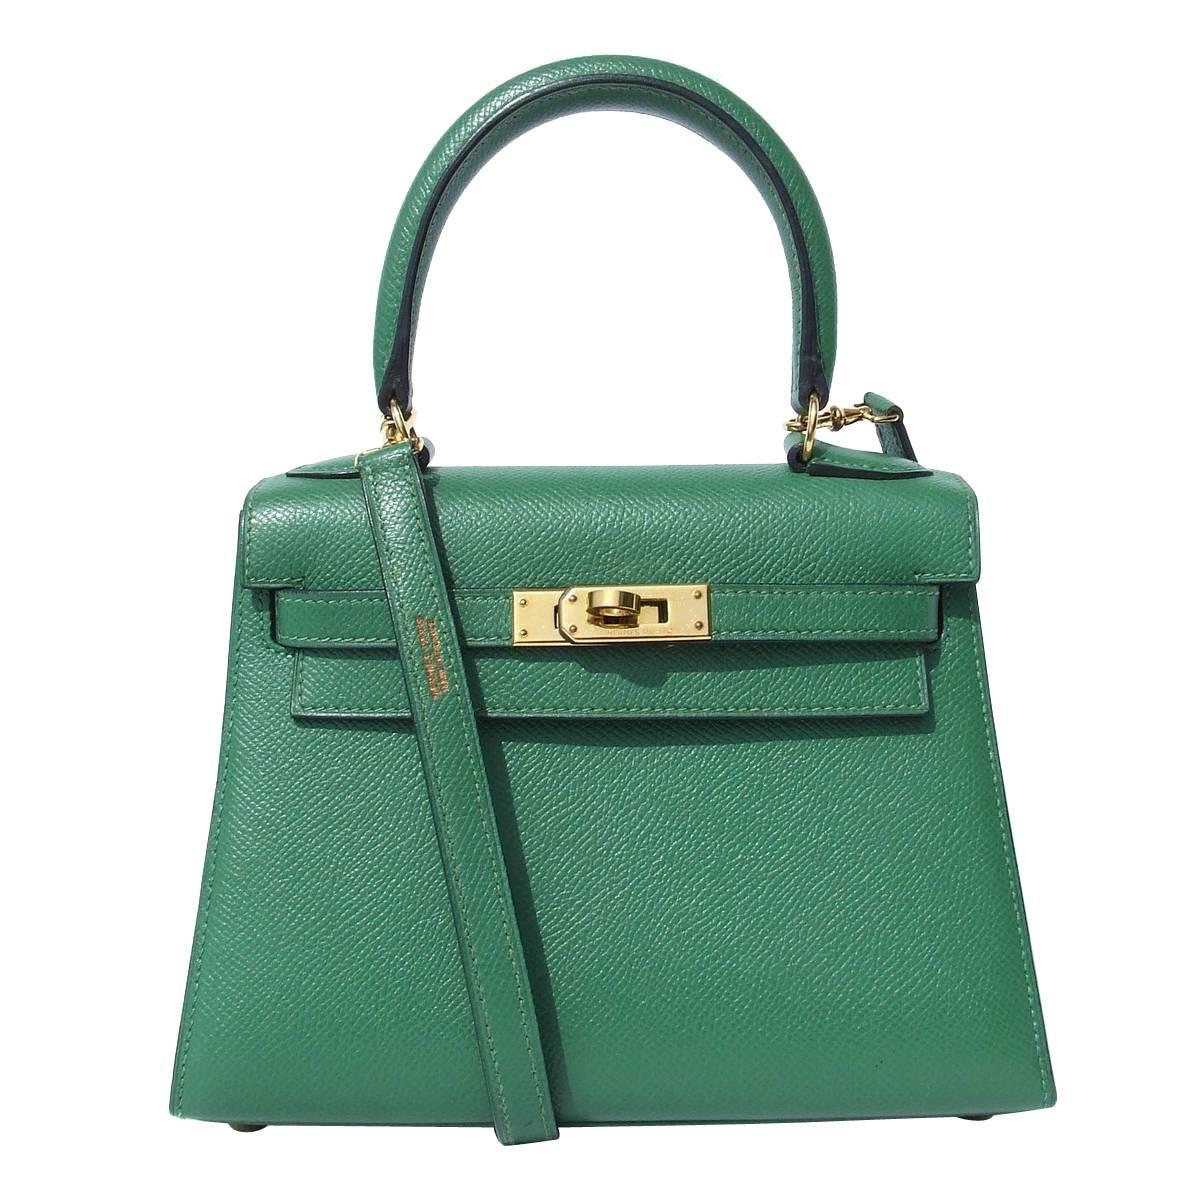 Rare Hermes Mini Kelly 20 cm Sellier Bag Green Courchevel Leather GHW 